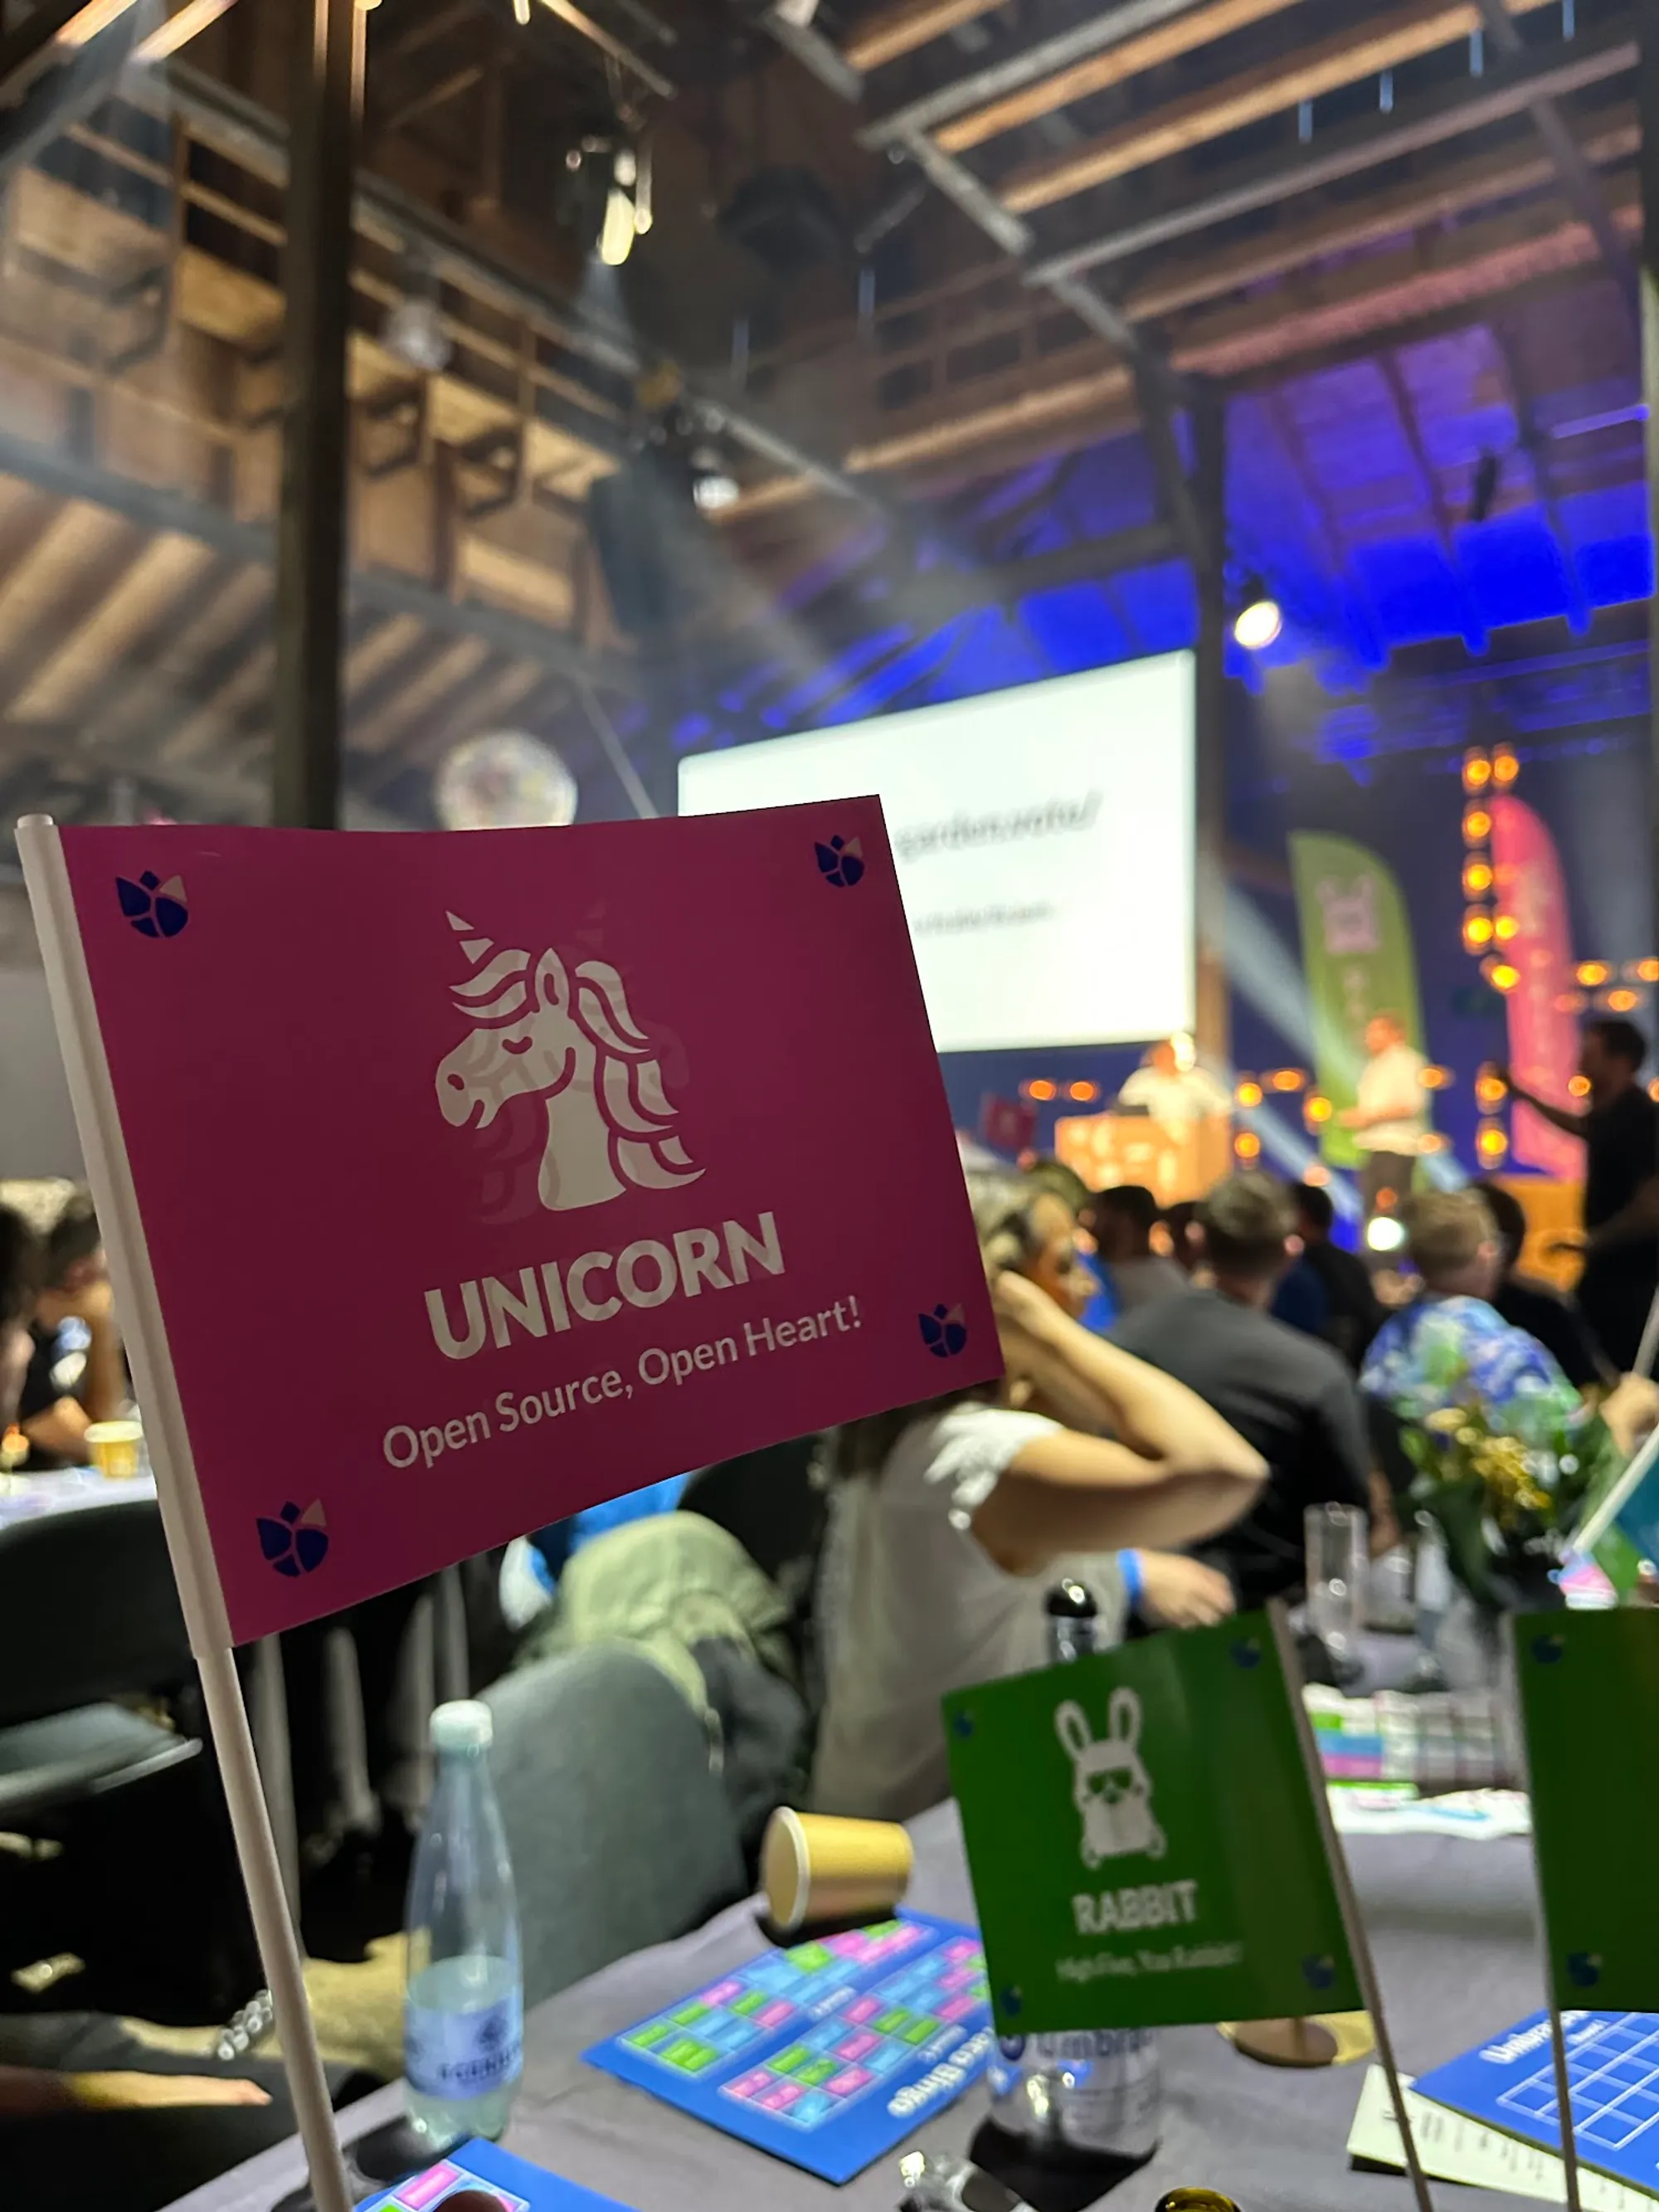 A pink flag with an illustration of a unicorn, reading "Unicorn. Open source, open heart!". In the background is the Codegarden conference out of focus